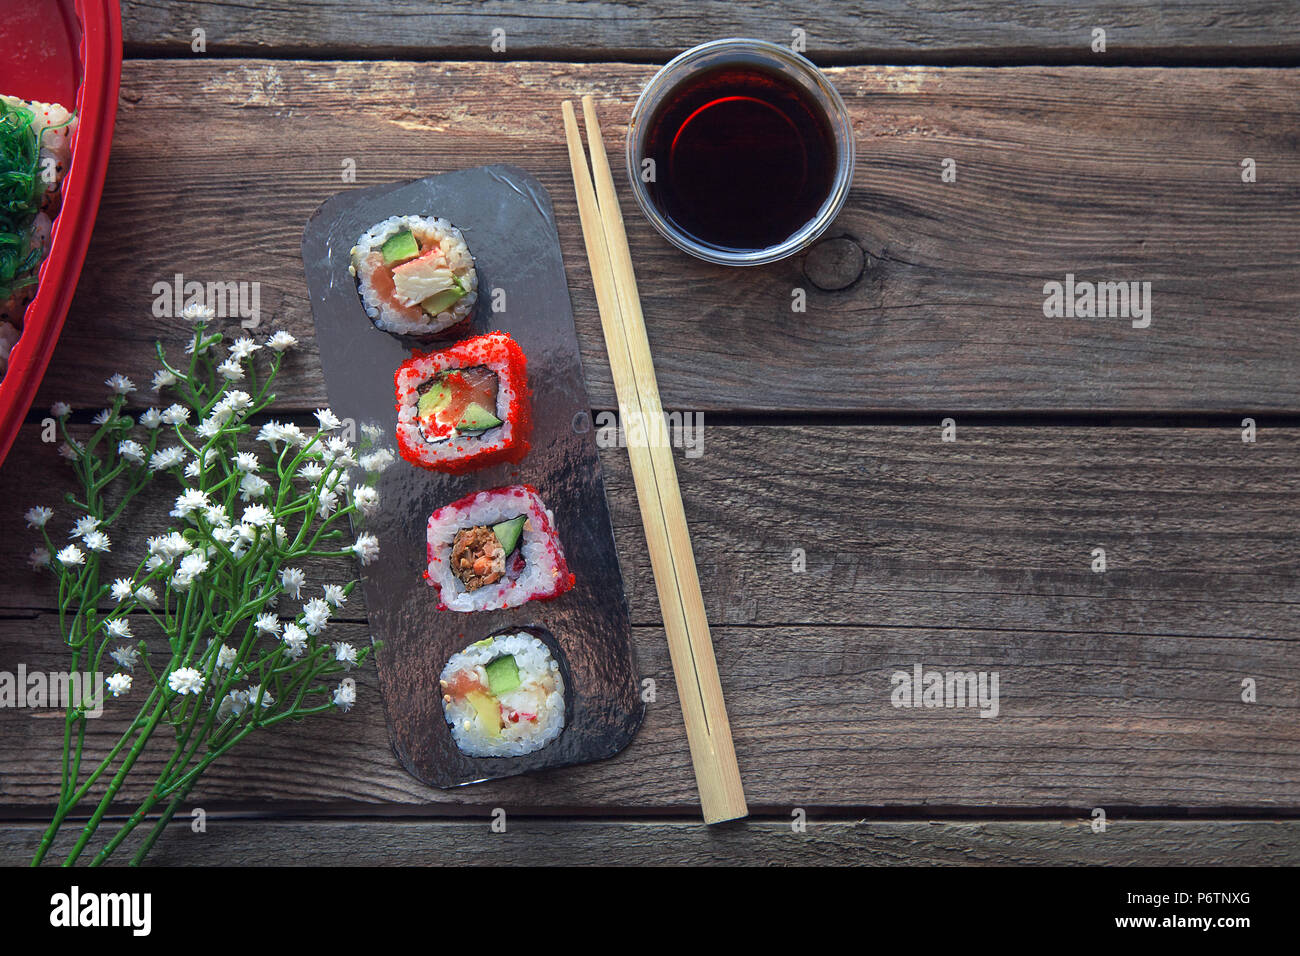 Sushi on a old wooden table background with a decoration Stock Photo